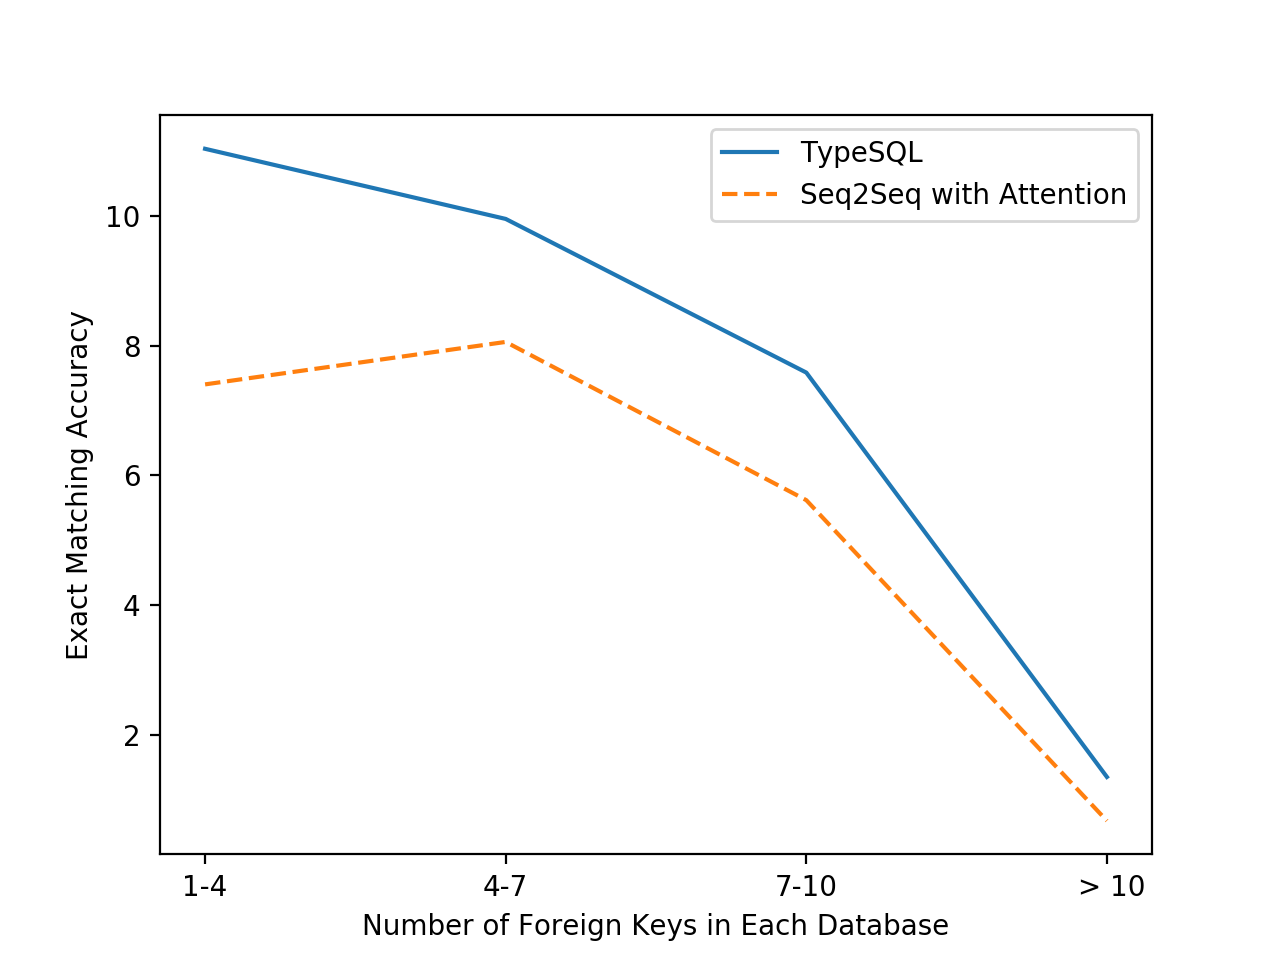 Exact matching accuracy as a function of the number of foreign keys.